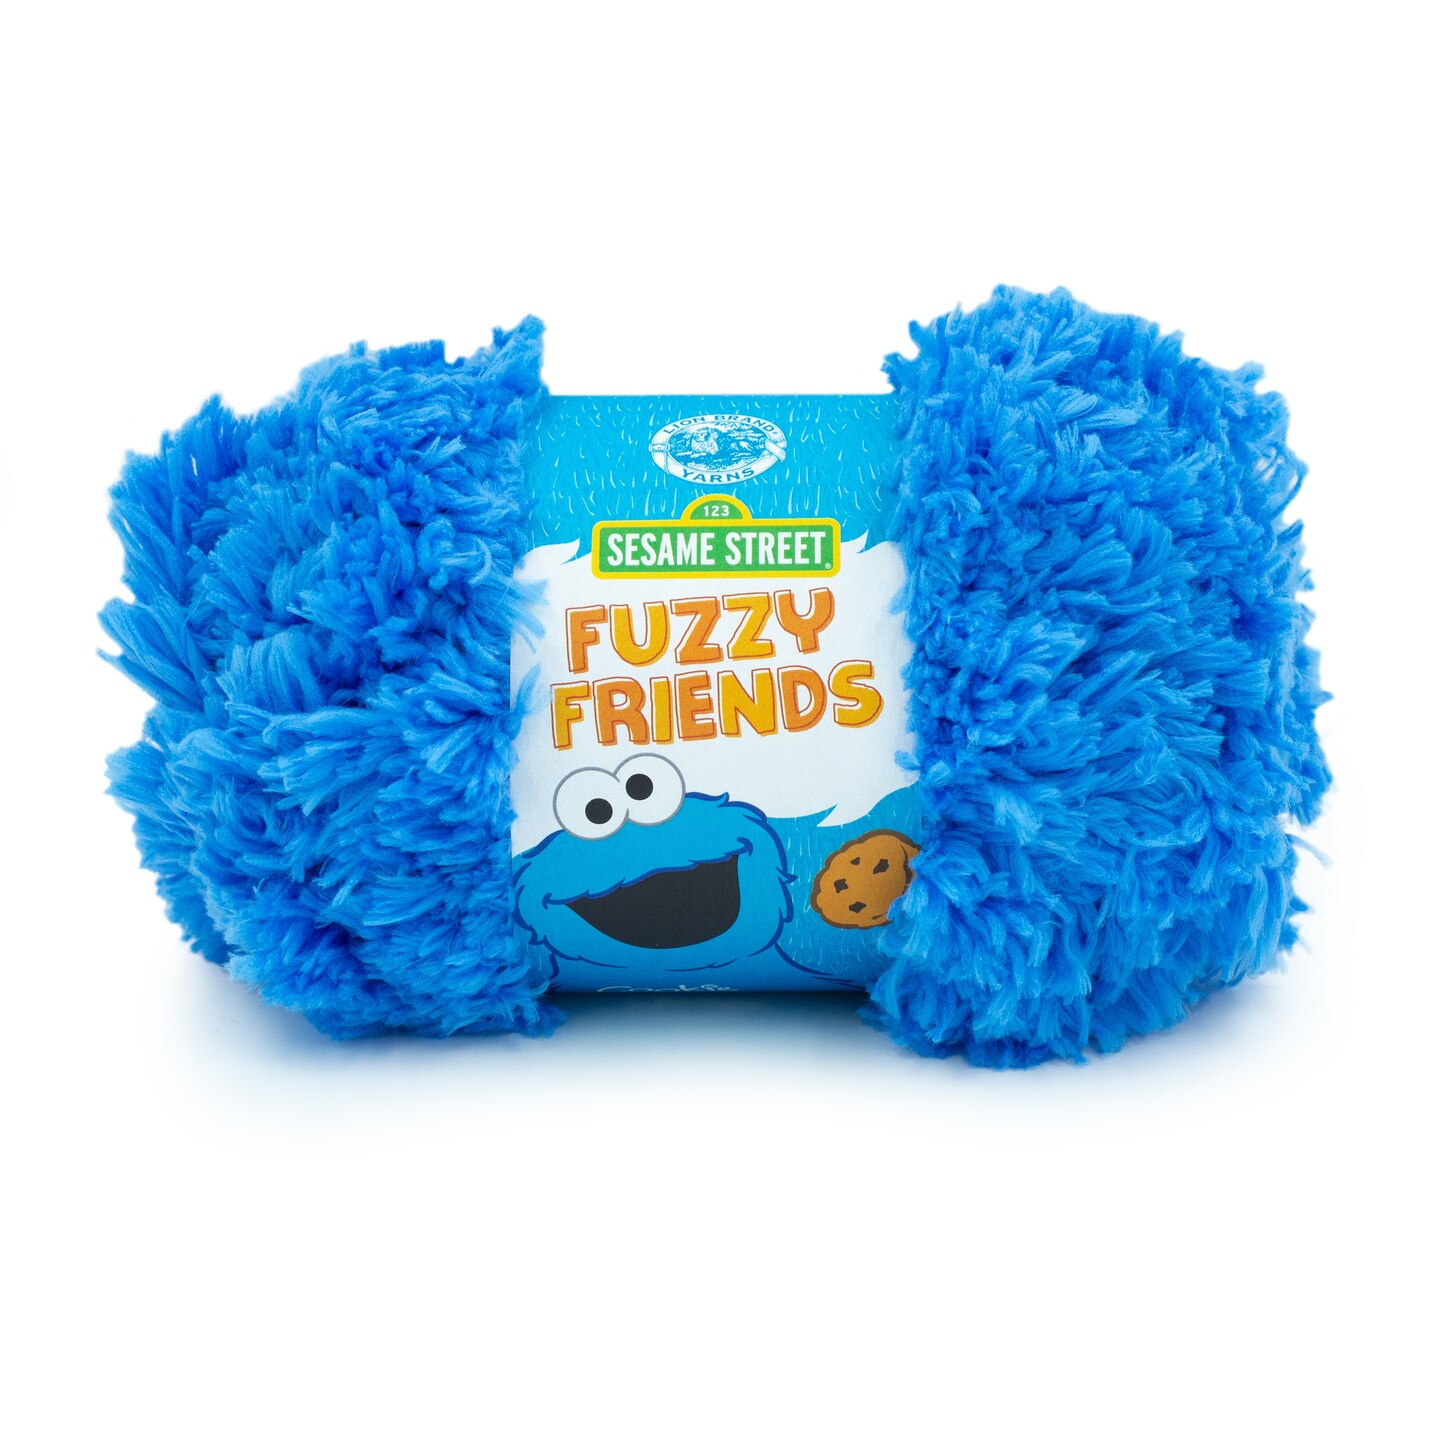 Lion Brand Truboo Sparkle Yarn-Sugar Cookie, 1 count - Fry's Food Stores